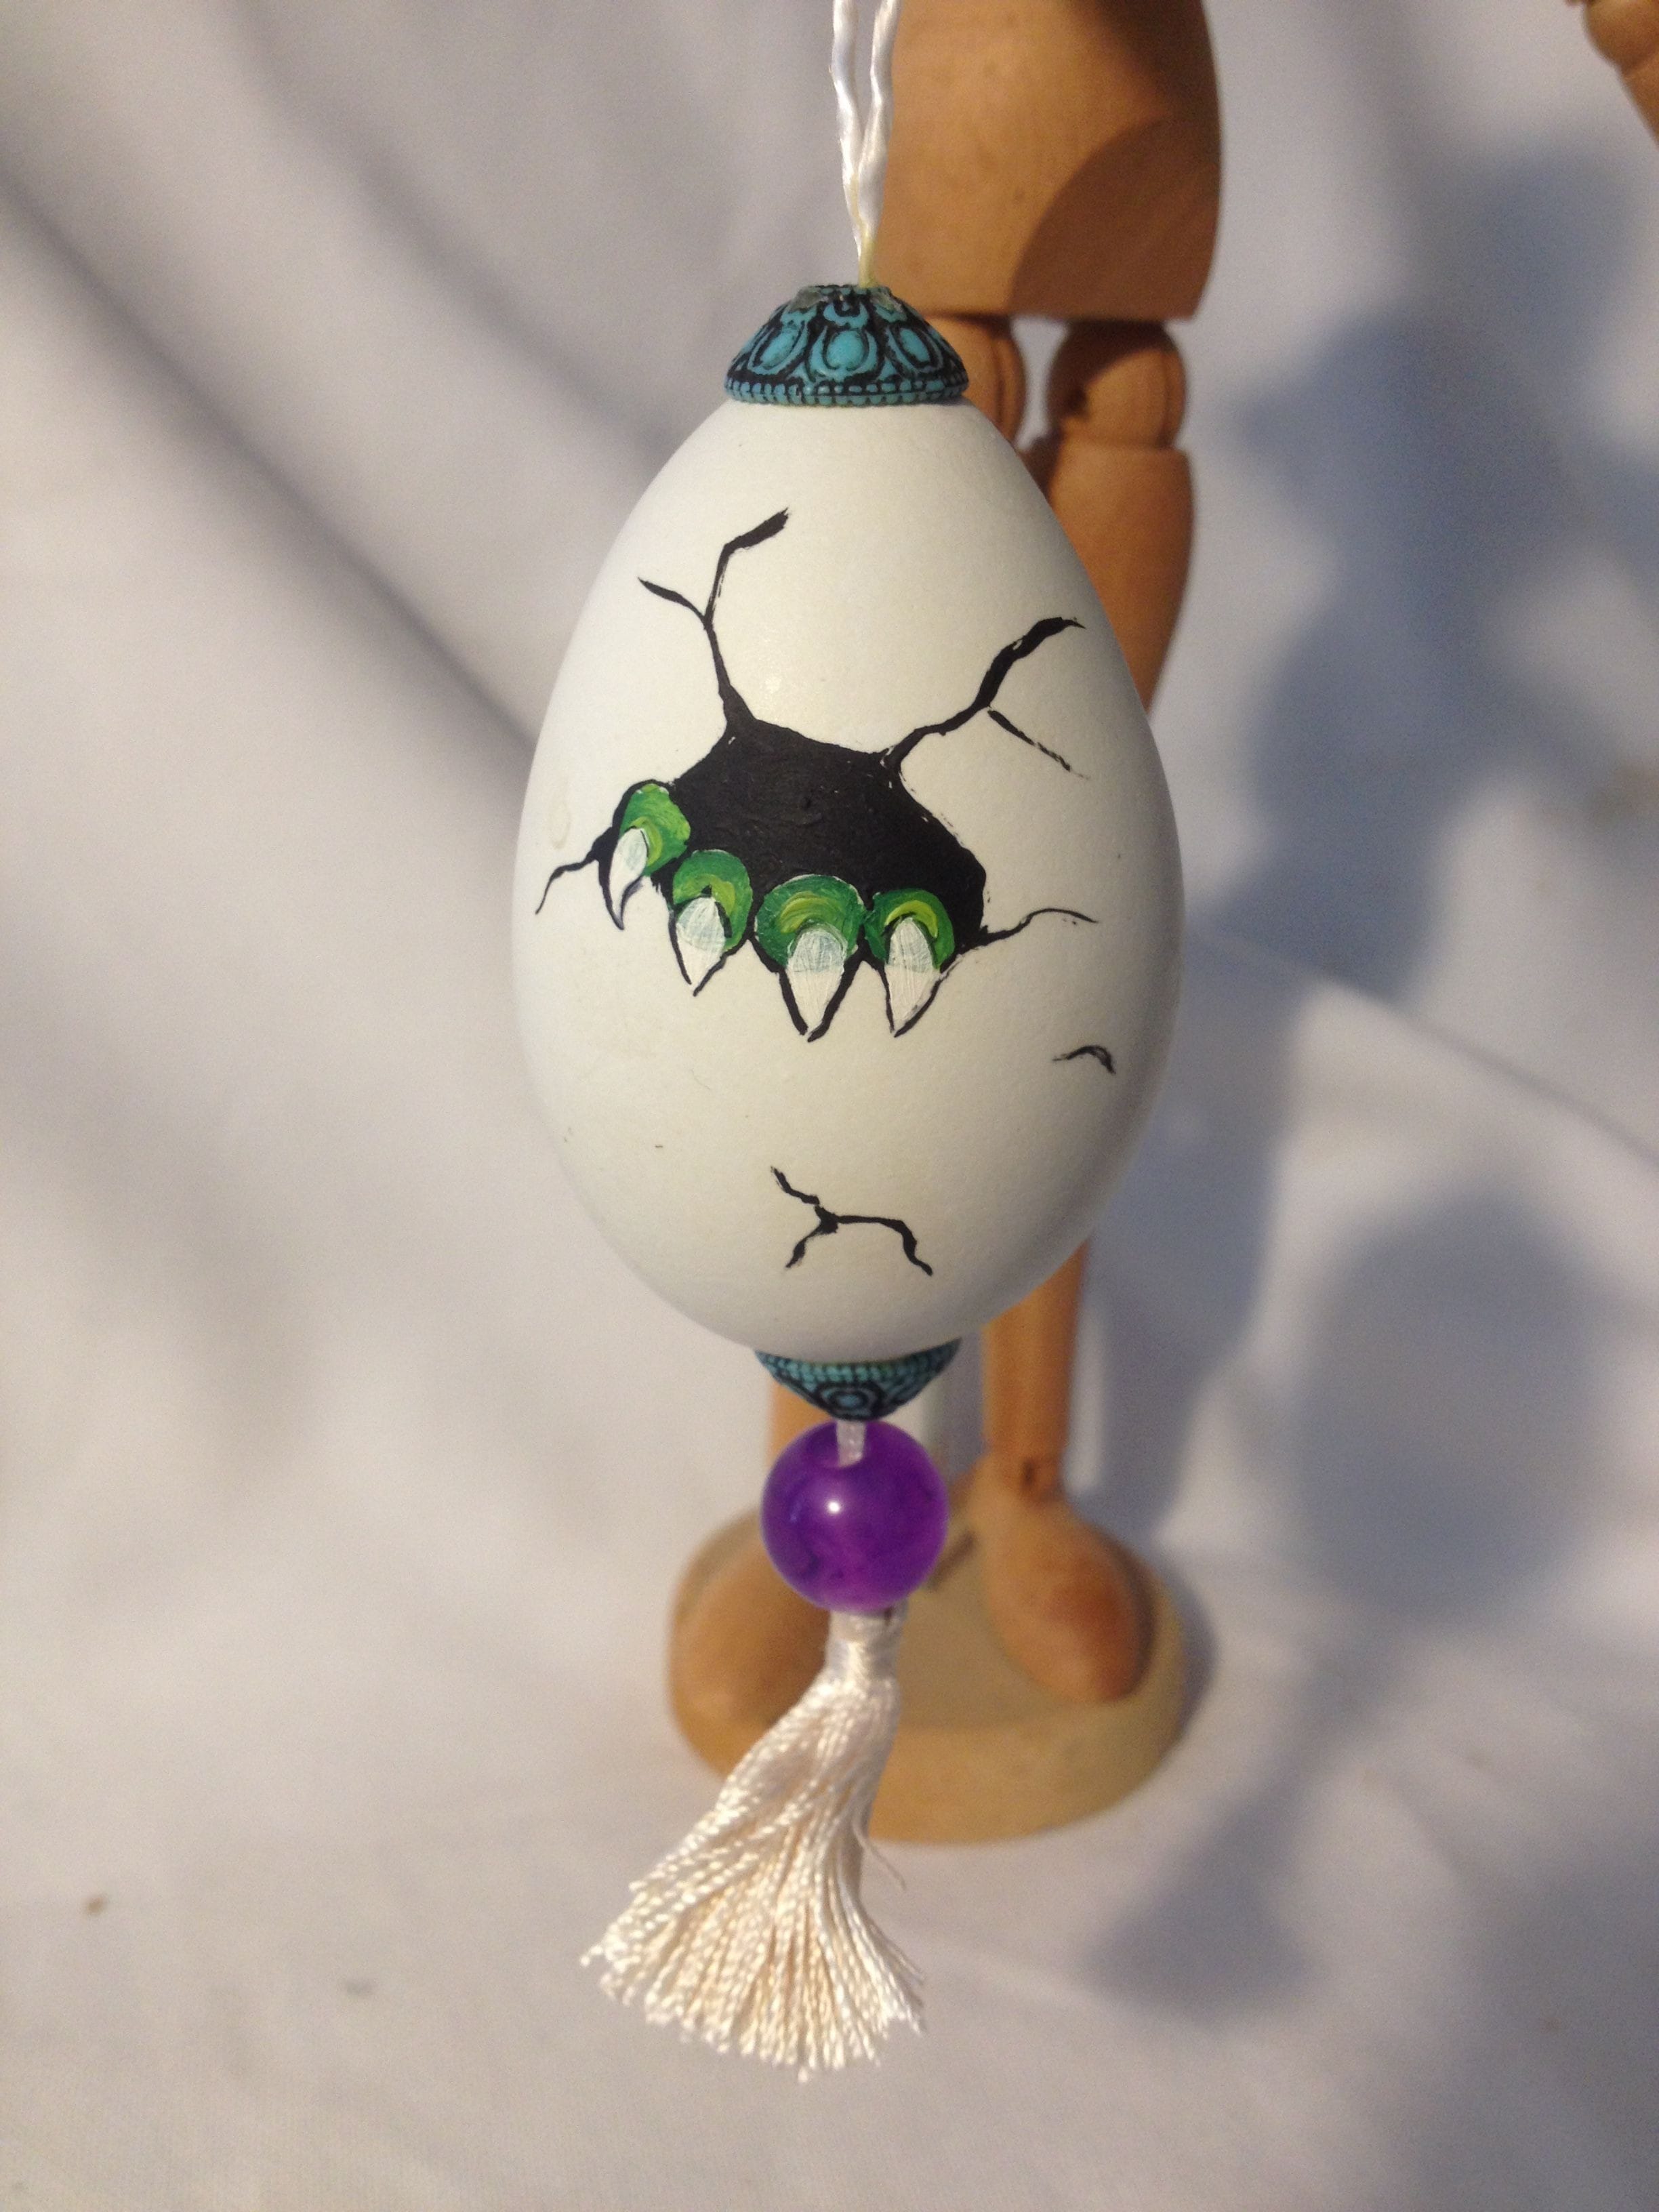 Painted chicken egg with hatching green dragonett's claws$20.